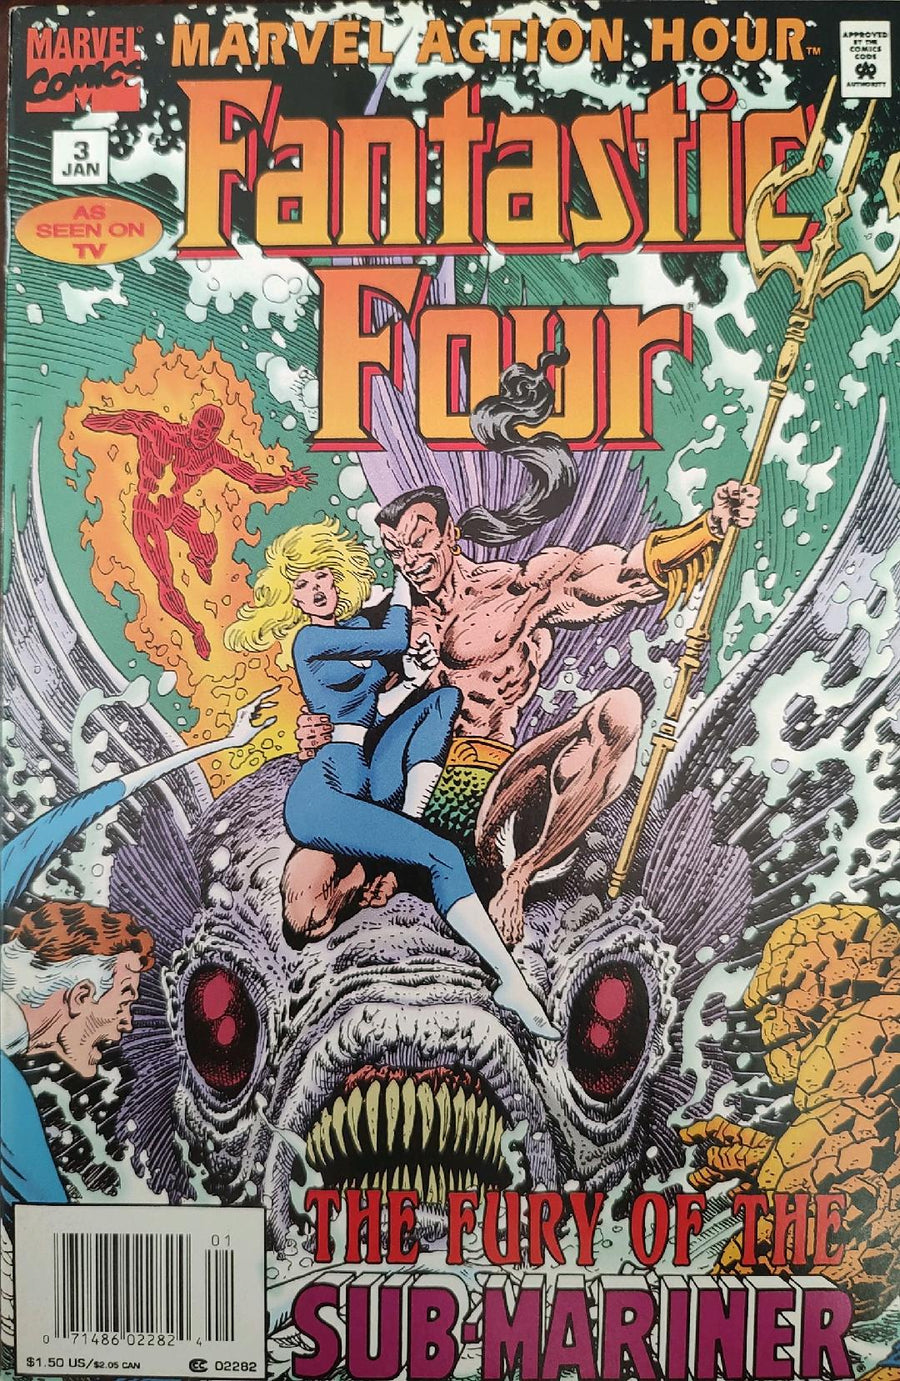 Marvel Action Hour Fantastic Four #3 Comic Book Cover